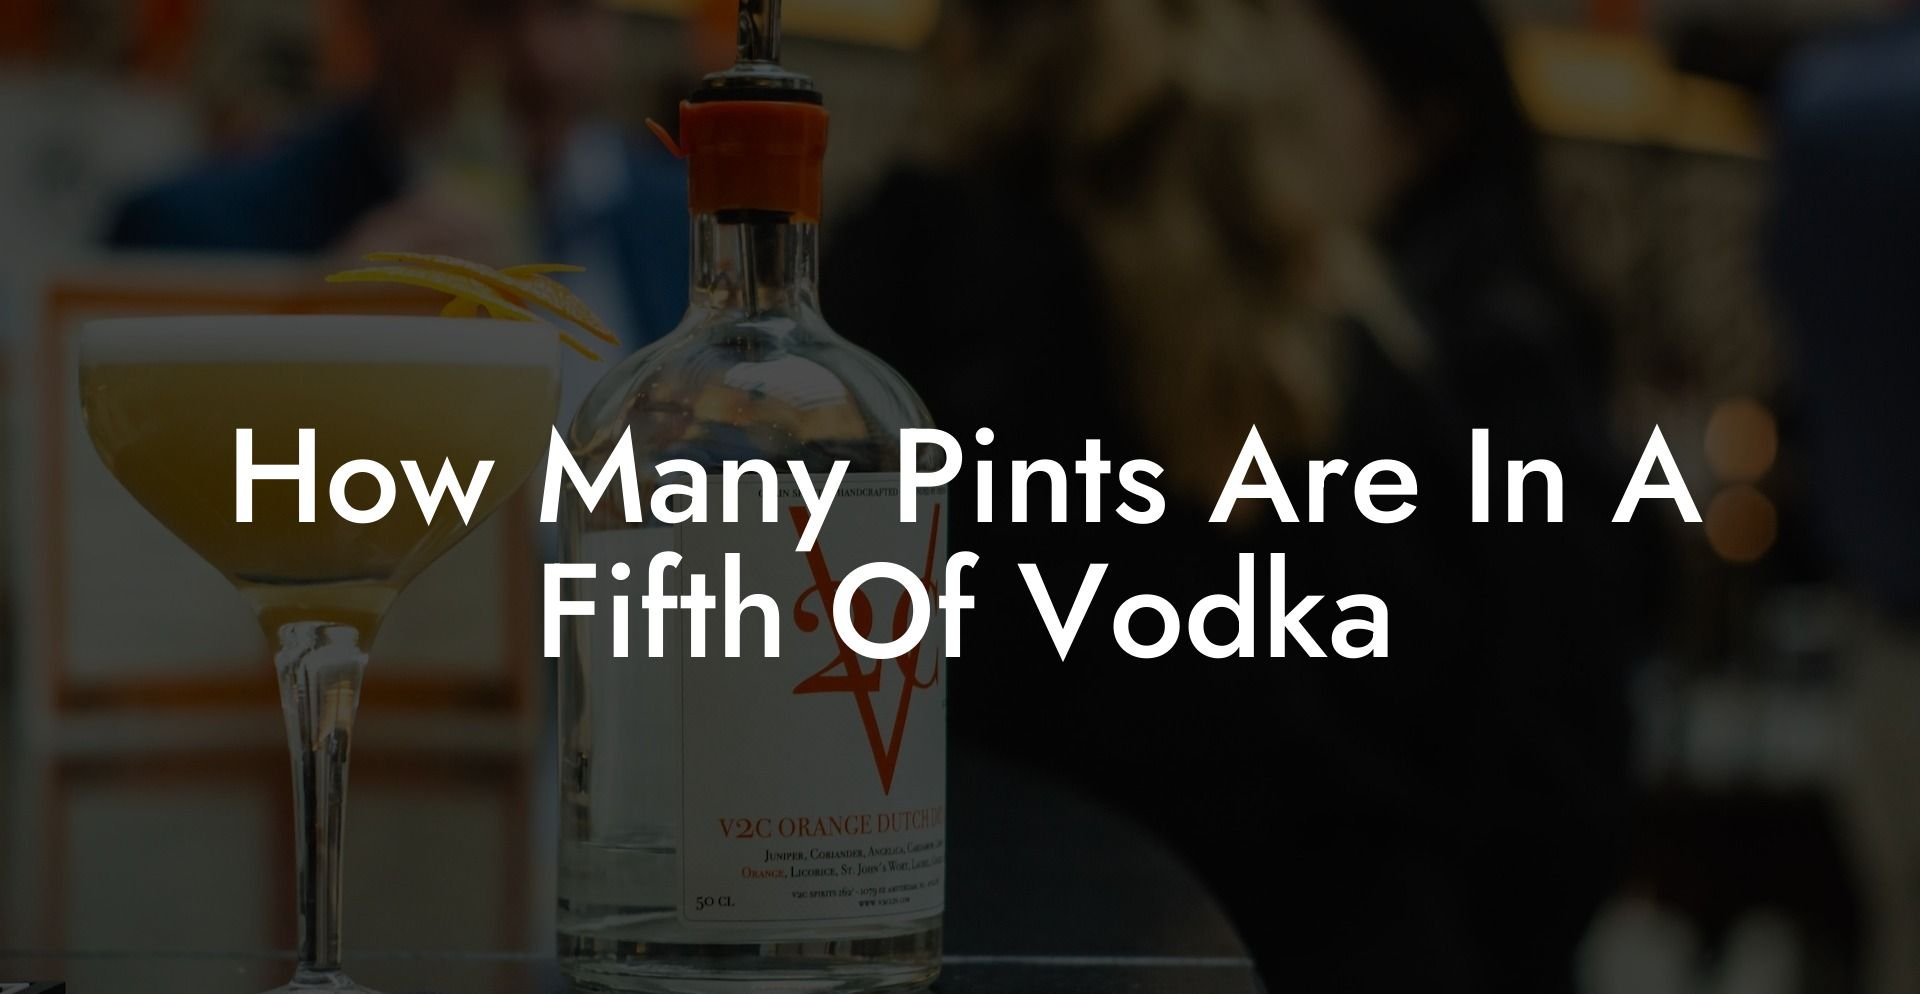 How Many Pints Are In A Fifth Of Vodka